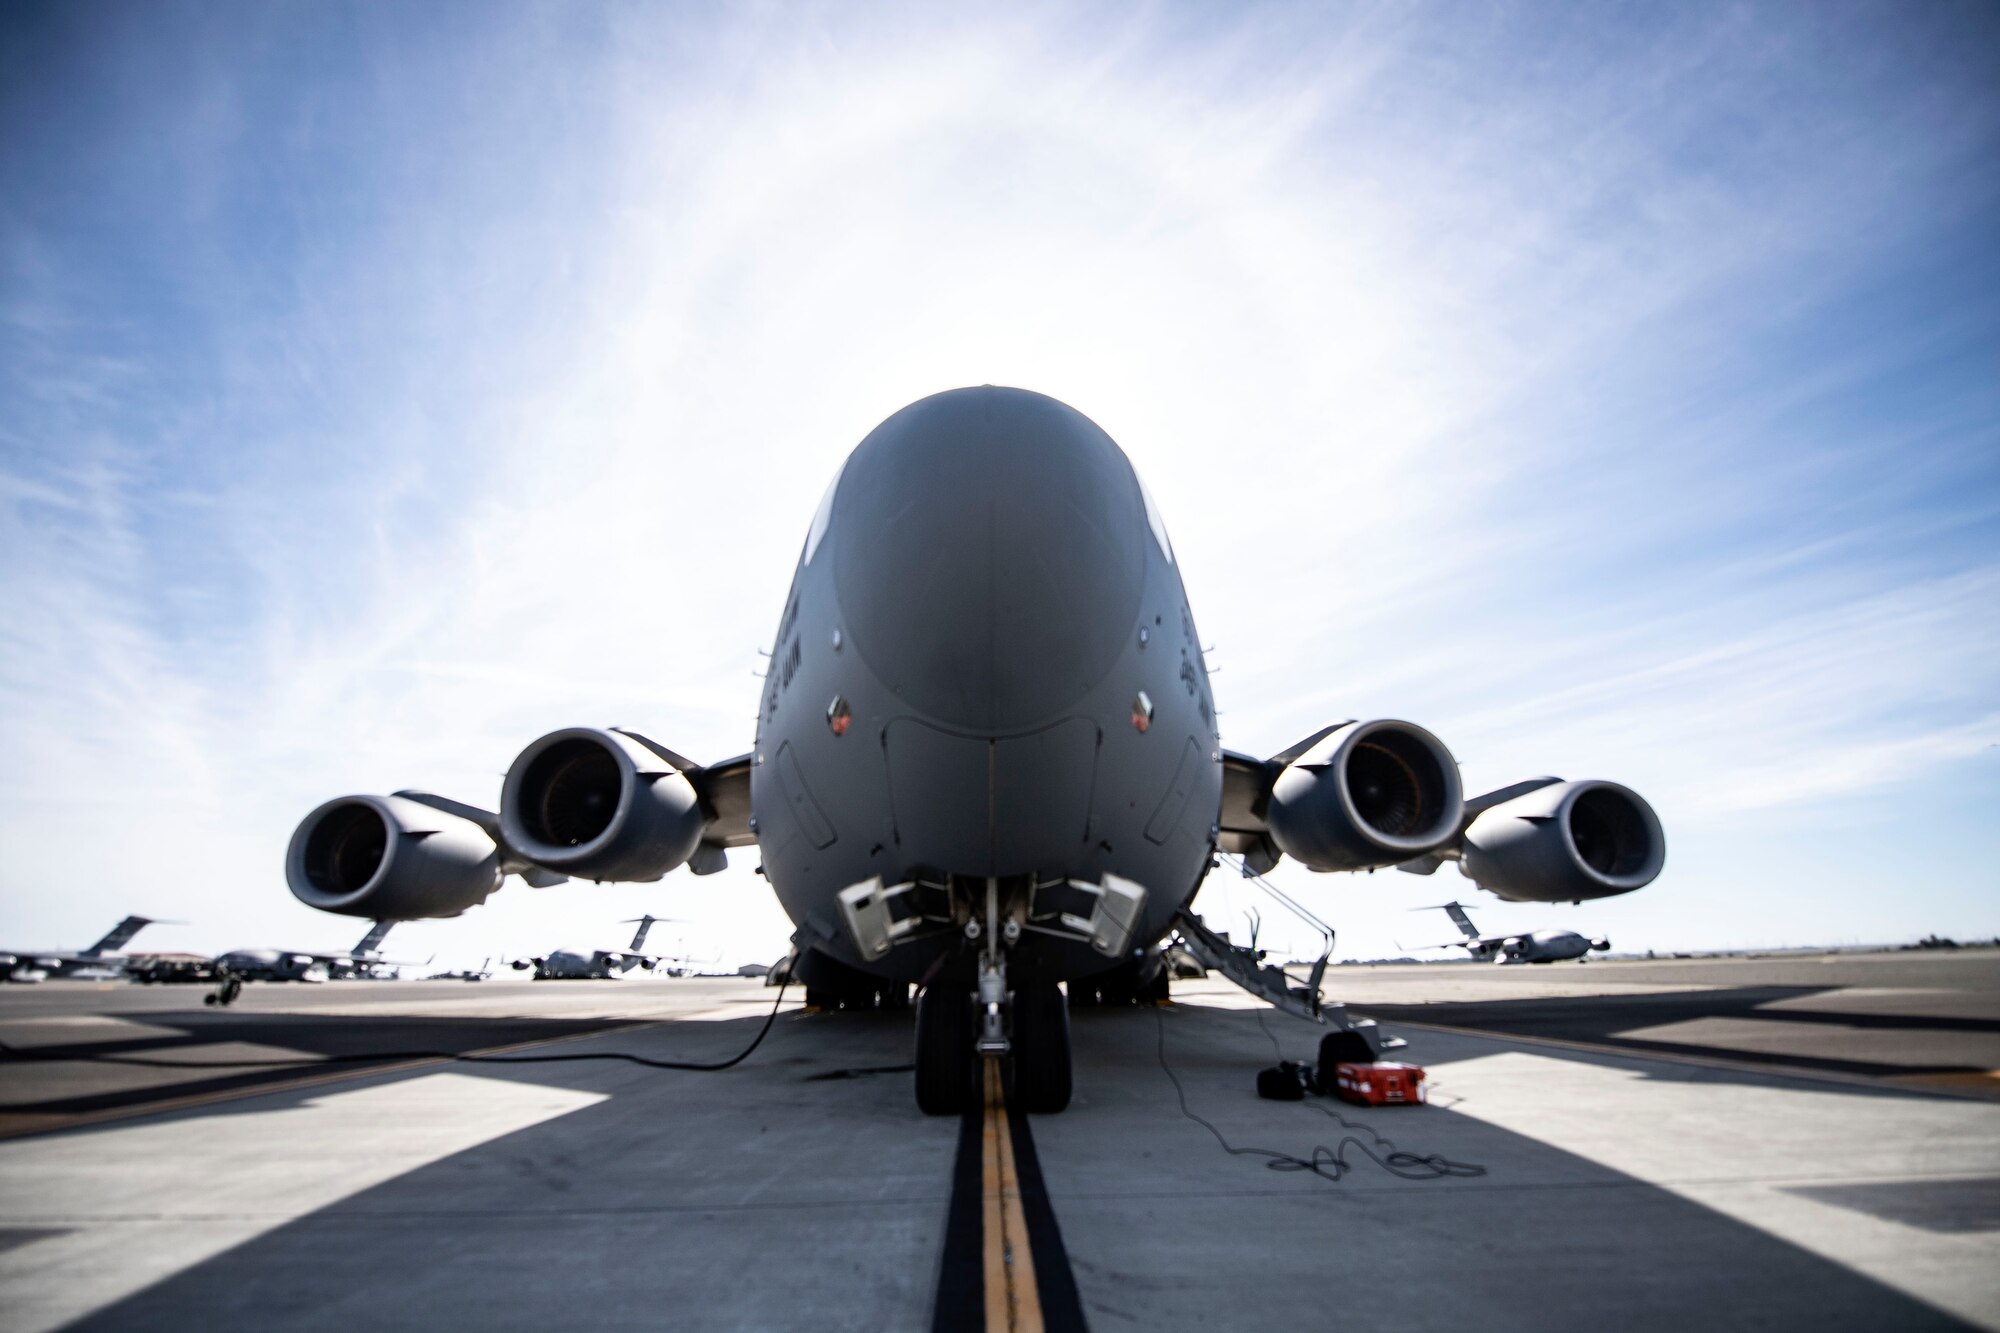 A C-17 Globemaster III is parked on the Travis flight line April 27, 2020, at Travis Air Force Base, California. As of now, only the C-17, C-130H Hercules and C-130J Super Hercules are capable of carrying Transport Isolation System capsules. TIS capsules, which were initially engineered in response to the Ebola virus in 2014, allow the transport of individuals with highly contagious diseases without infecting any other passengers or aircrew on the aircraft. (U.S. Air Force photo by Senior Airman Christian Conrad)